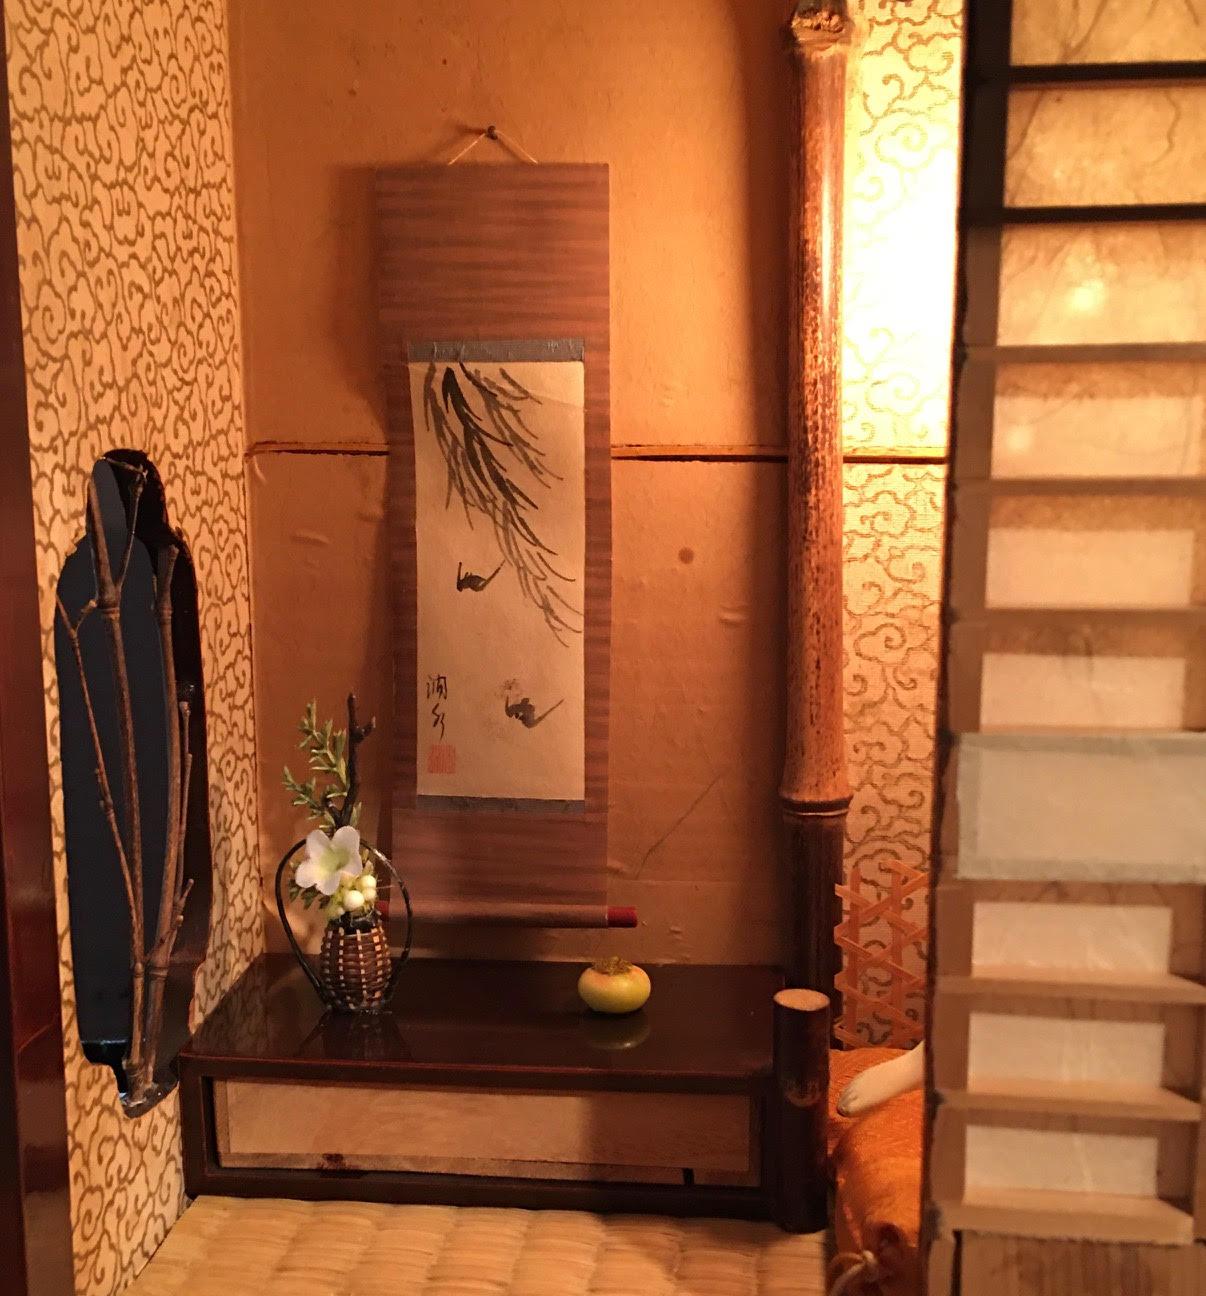 Japanese Shunga in a tea house. Extremely rare masterpiece in the category Shunga (erotic art) The tea house is crafted to perfection with beautiful lacquer work, Shoji screens and windows It has a Tokonoma displaying a scroll, Ikebana flower